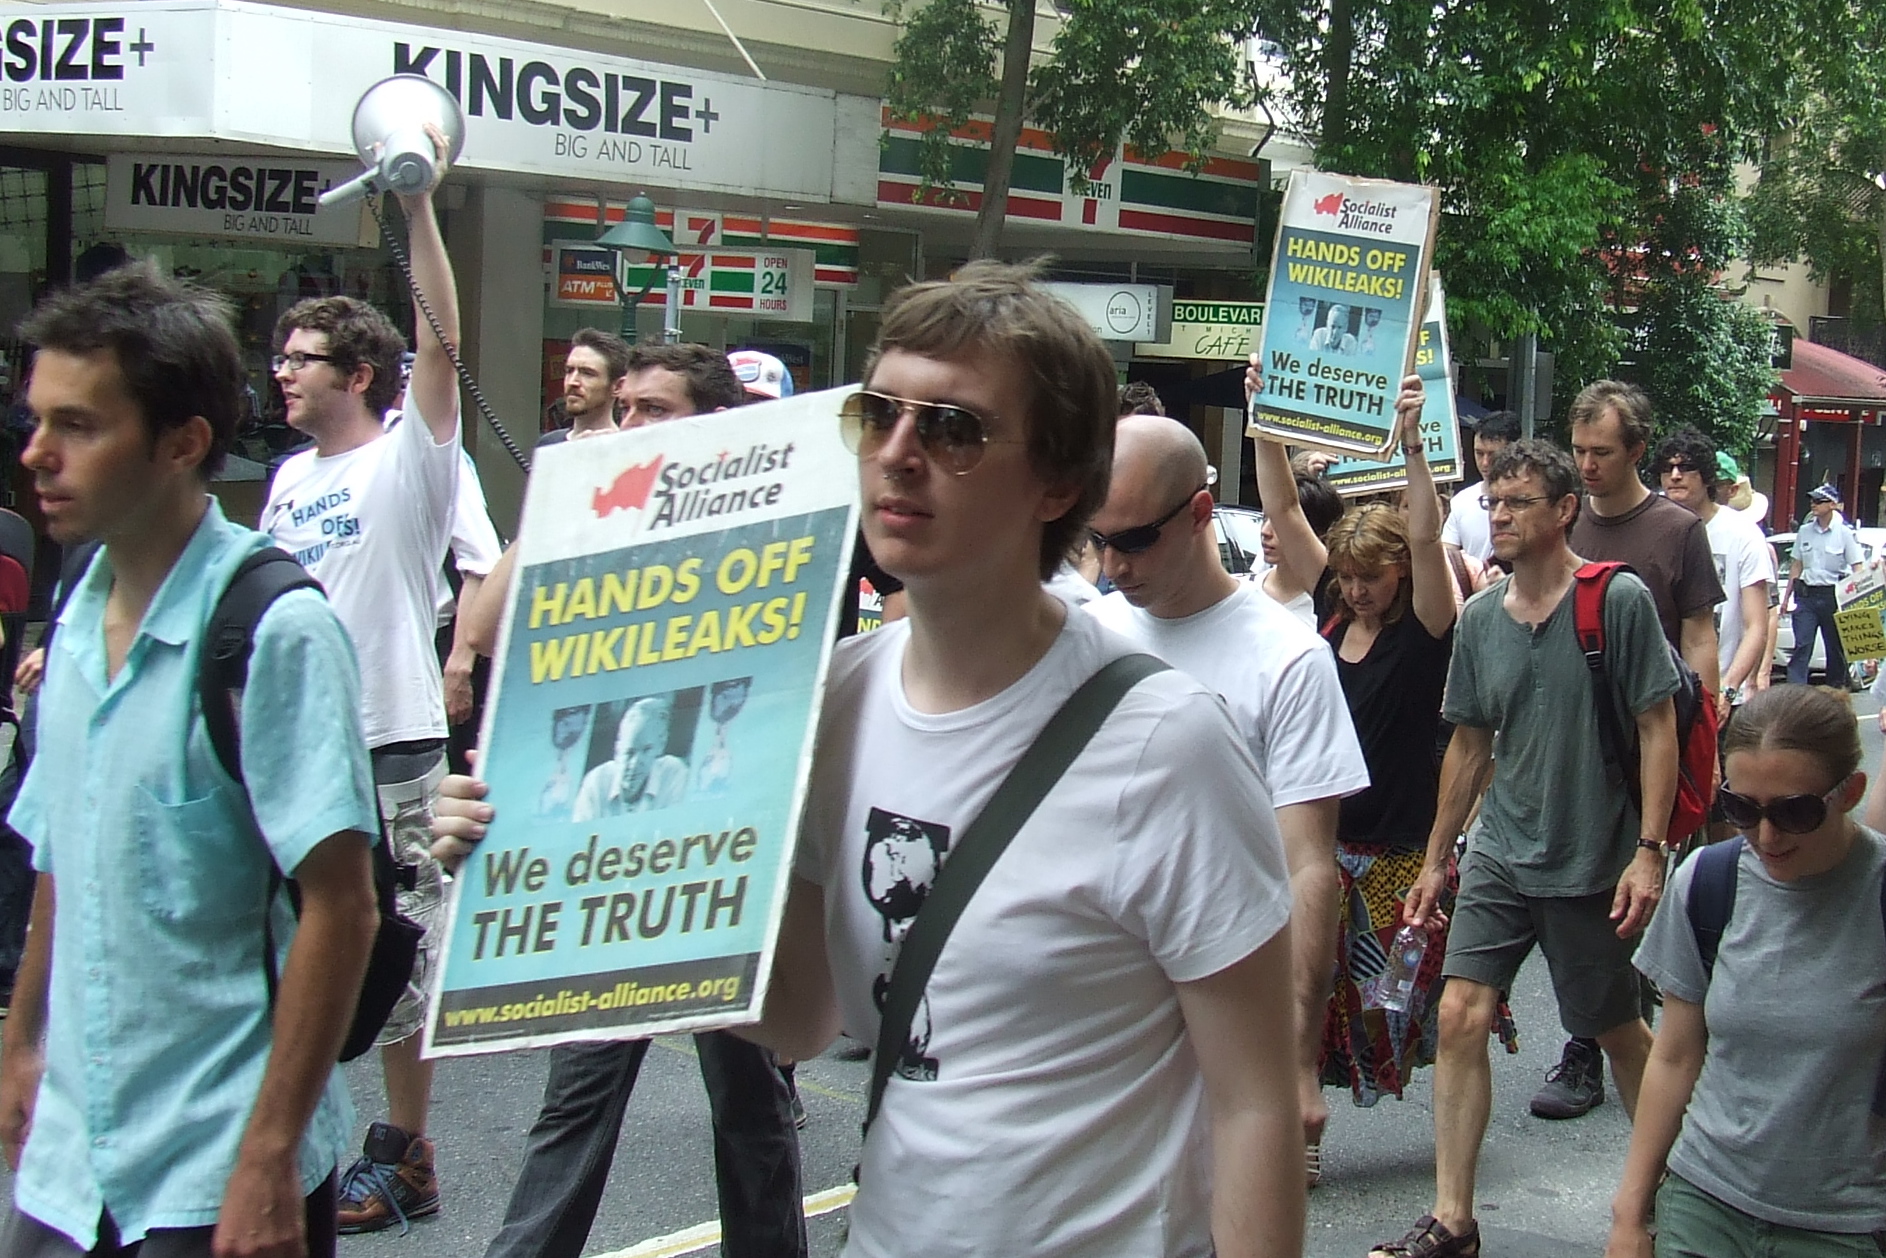 a crowd of men walking down a street holding signs